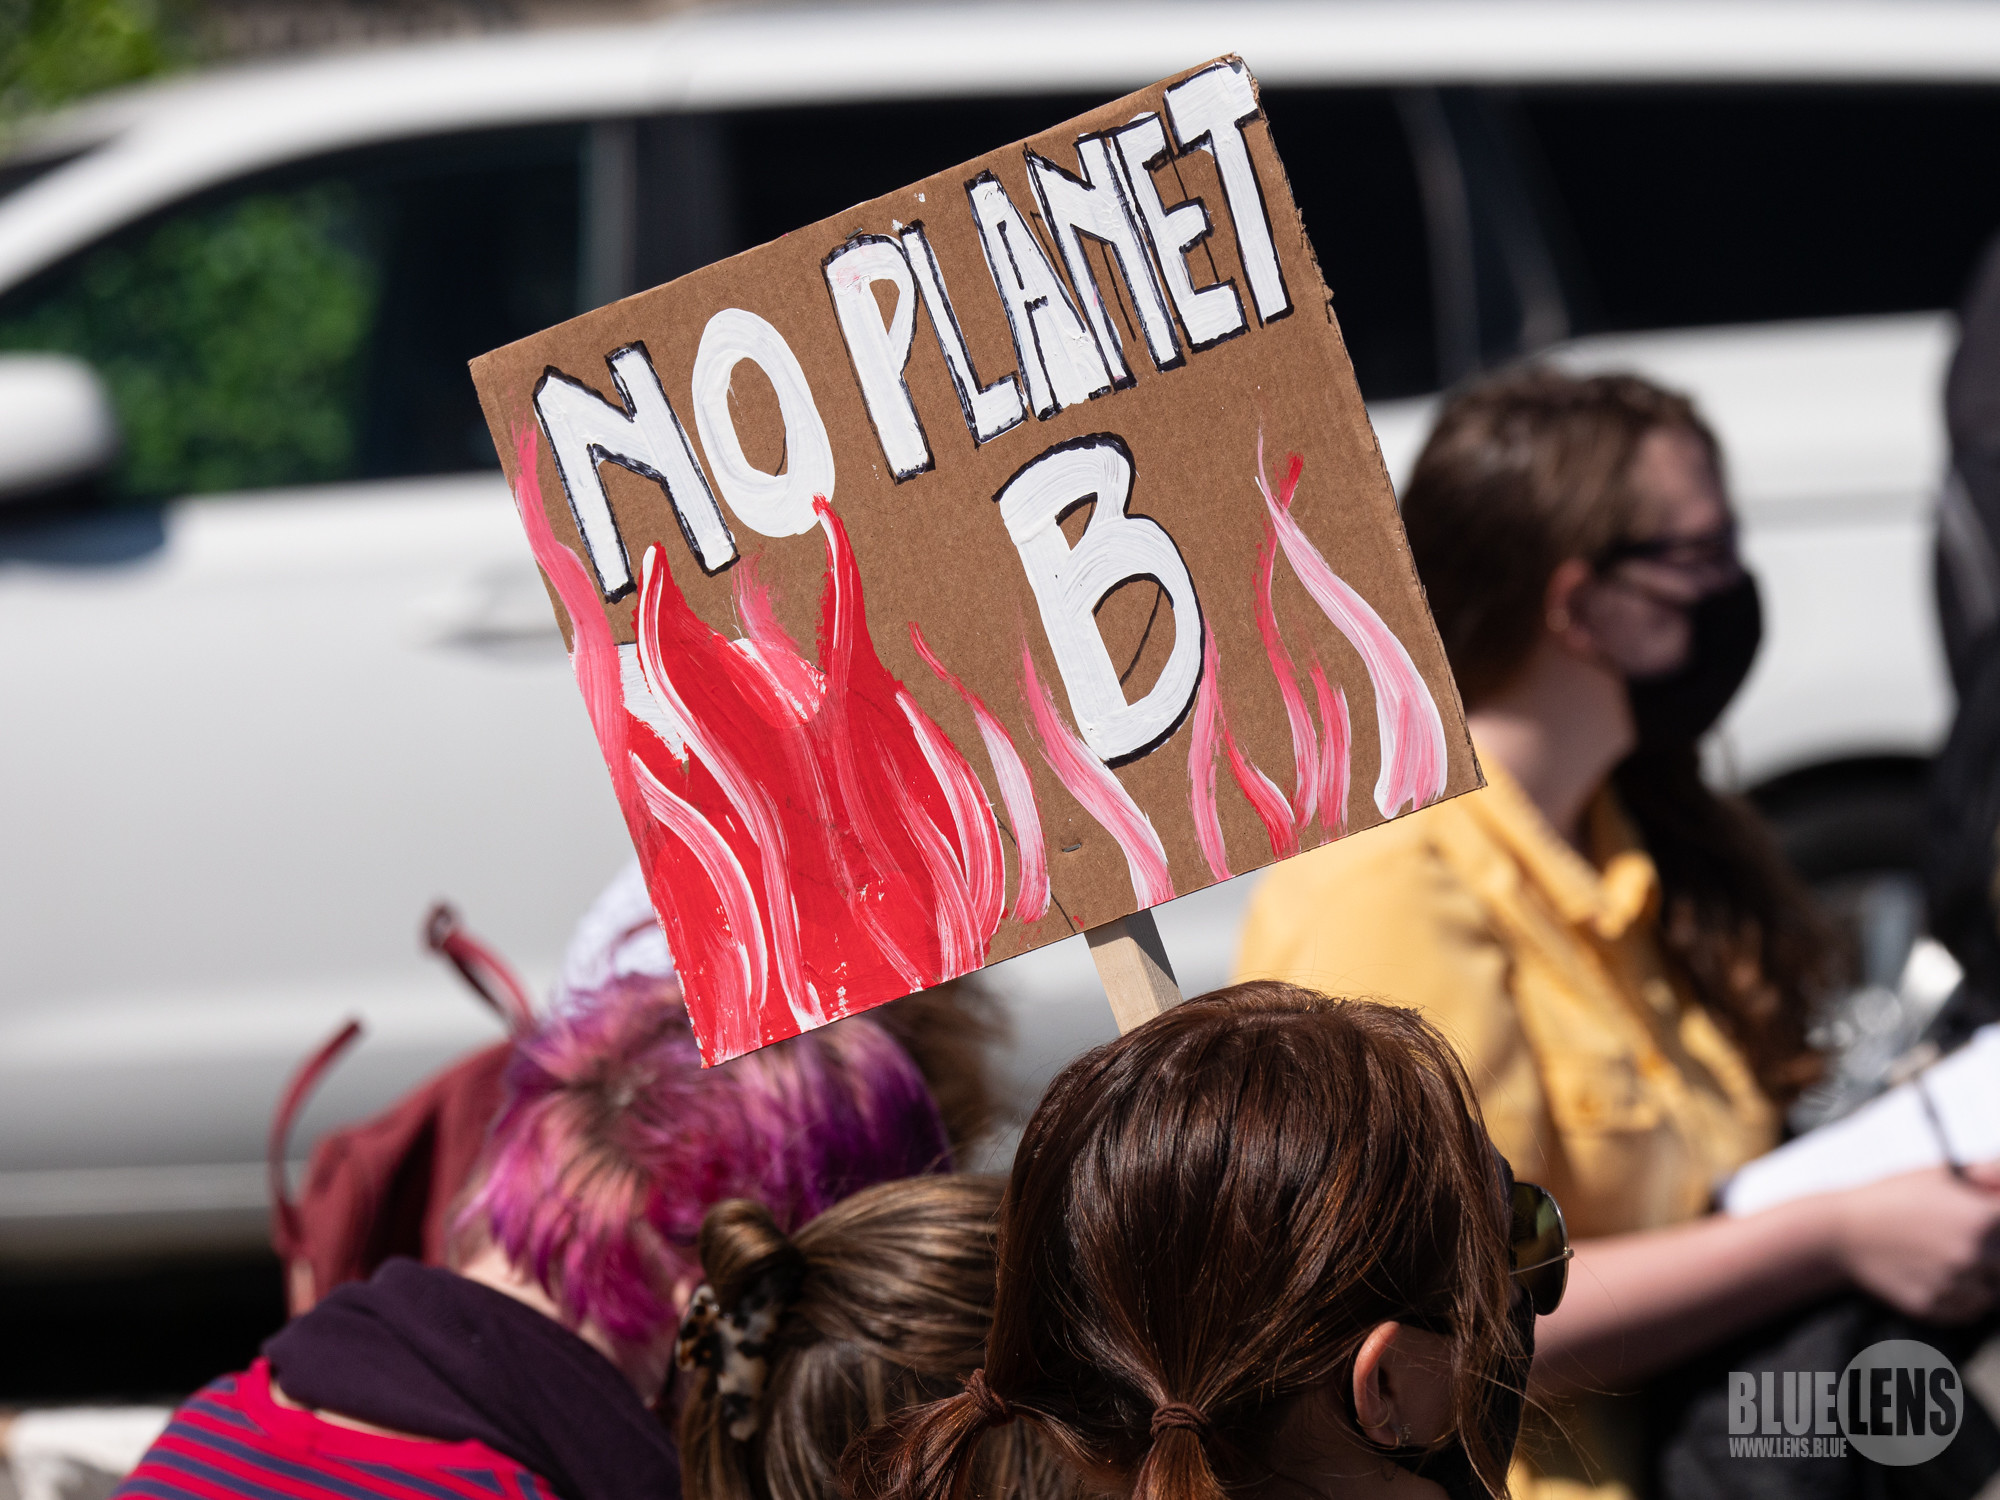 The Climate Strike and March in Pittsburgh, September 24, 2021 (by Mark Dixon CC BY 2.0 DEED via Flickr).